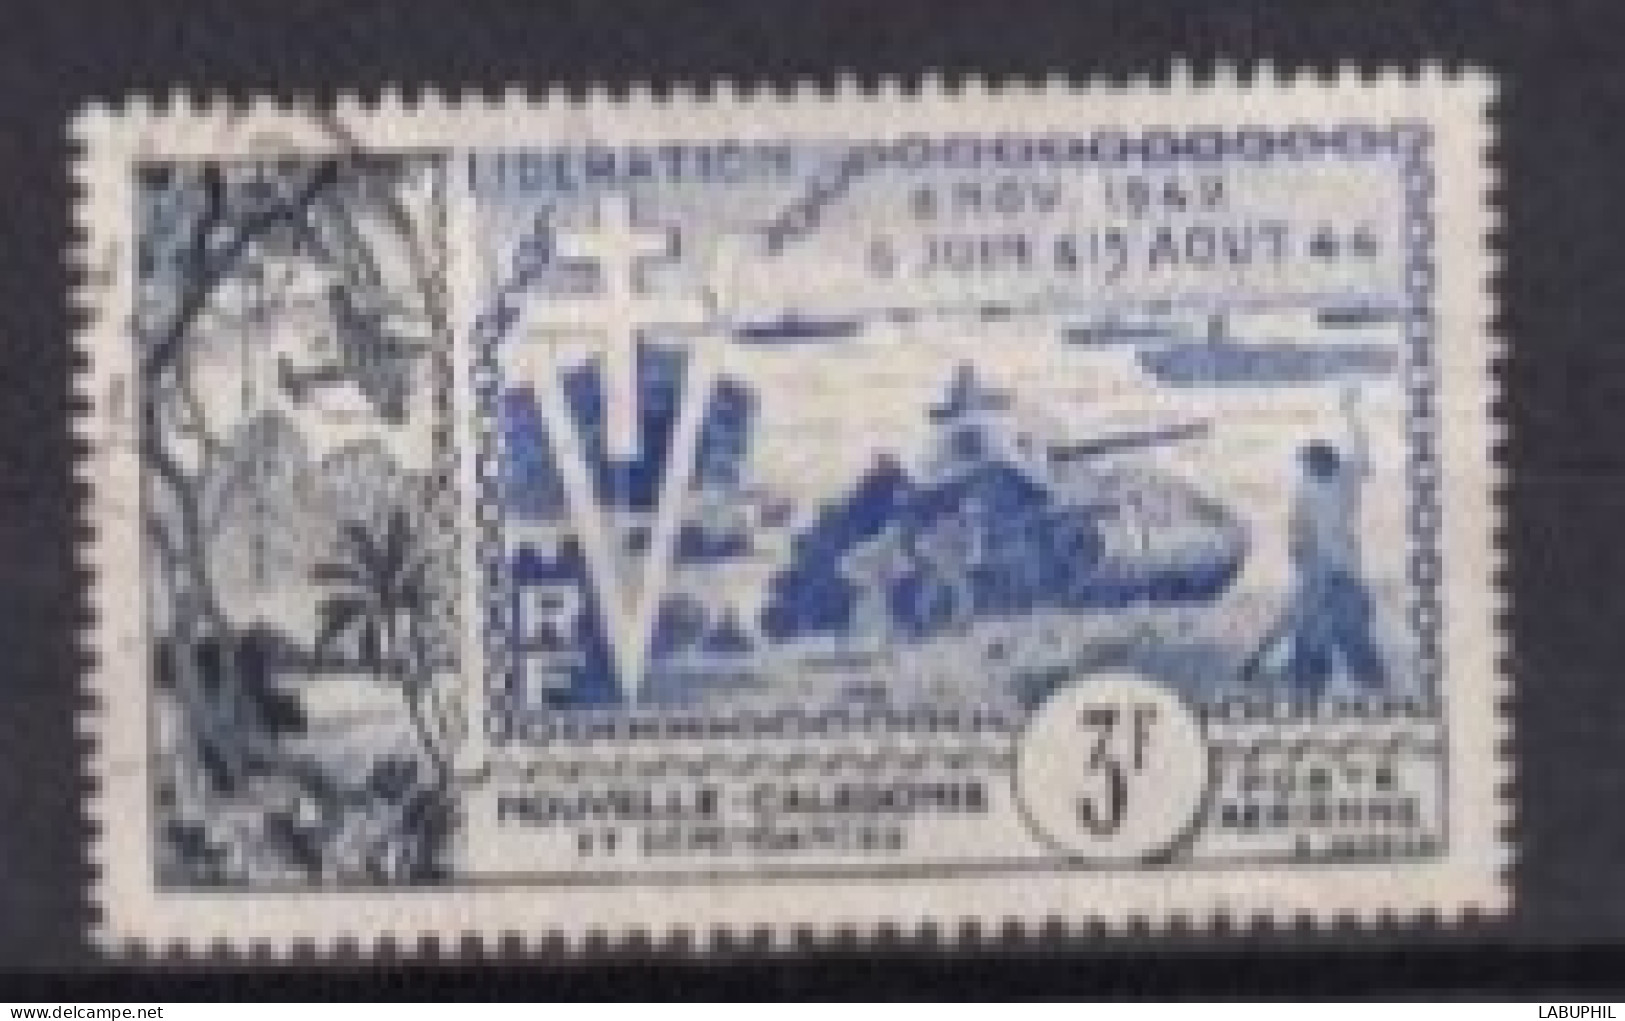 NOUVELLE CALEDONIE Dispersion D'une Collection Oblitéré Used  1954 - Used Stamps